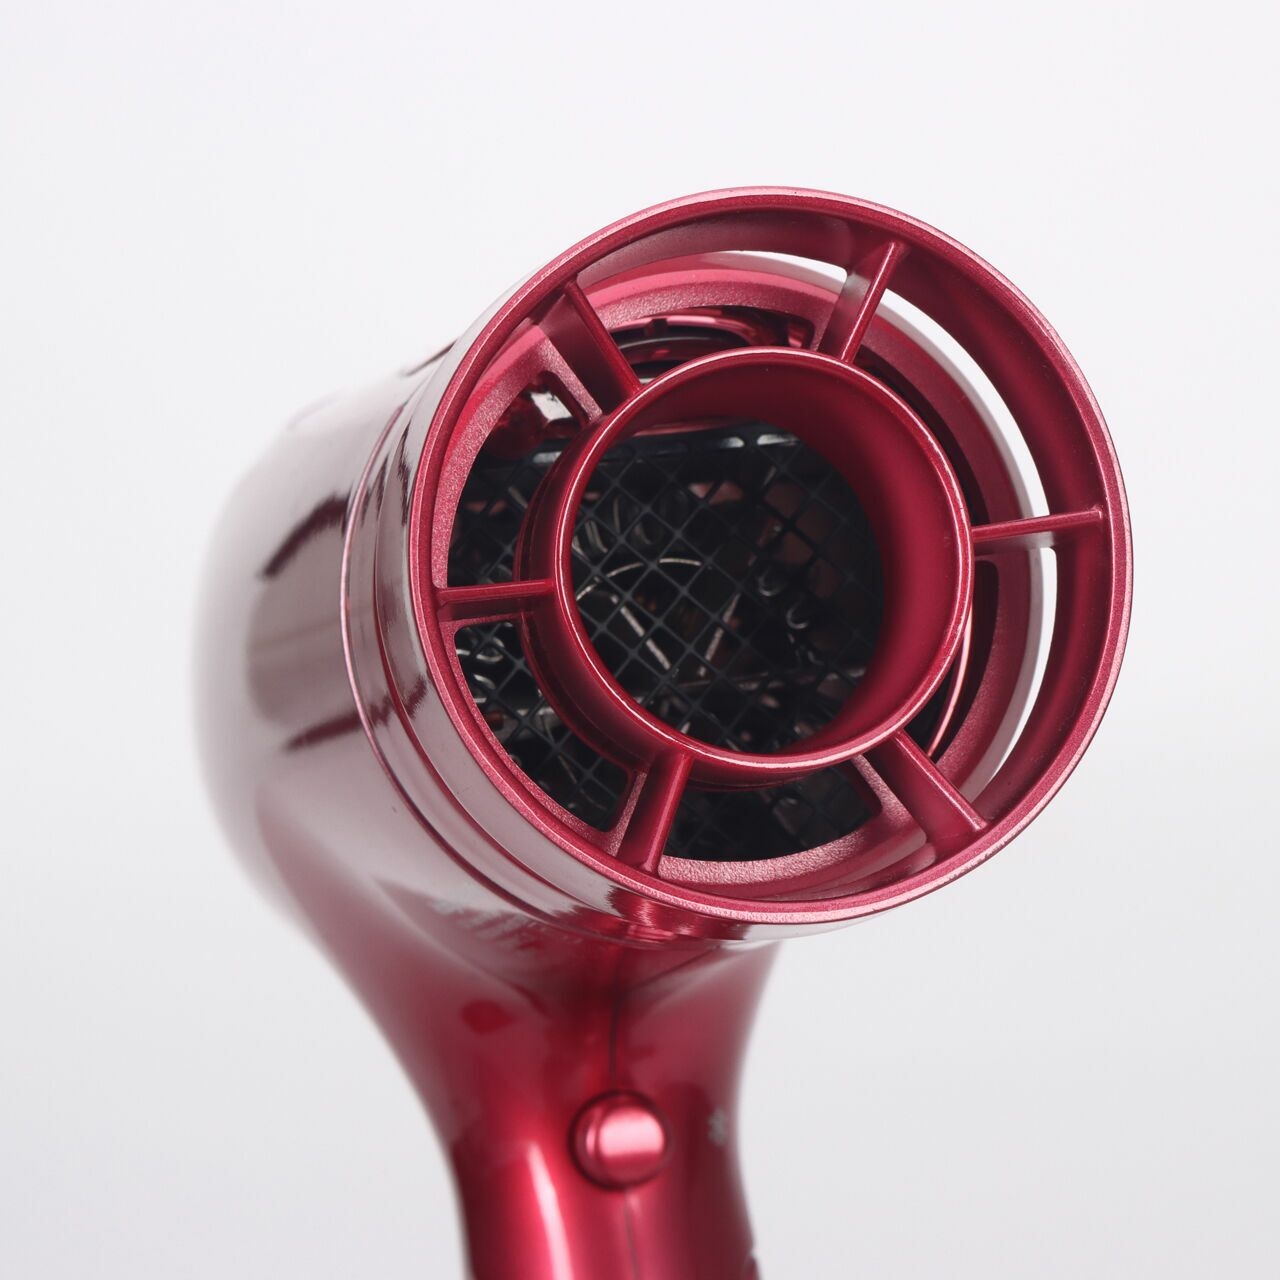 Nobby by Tescom Pink Collagen Ion Hair Dryer 